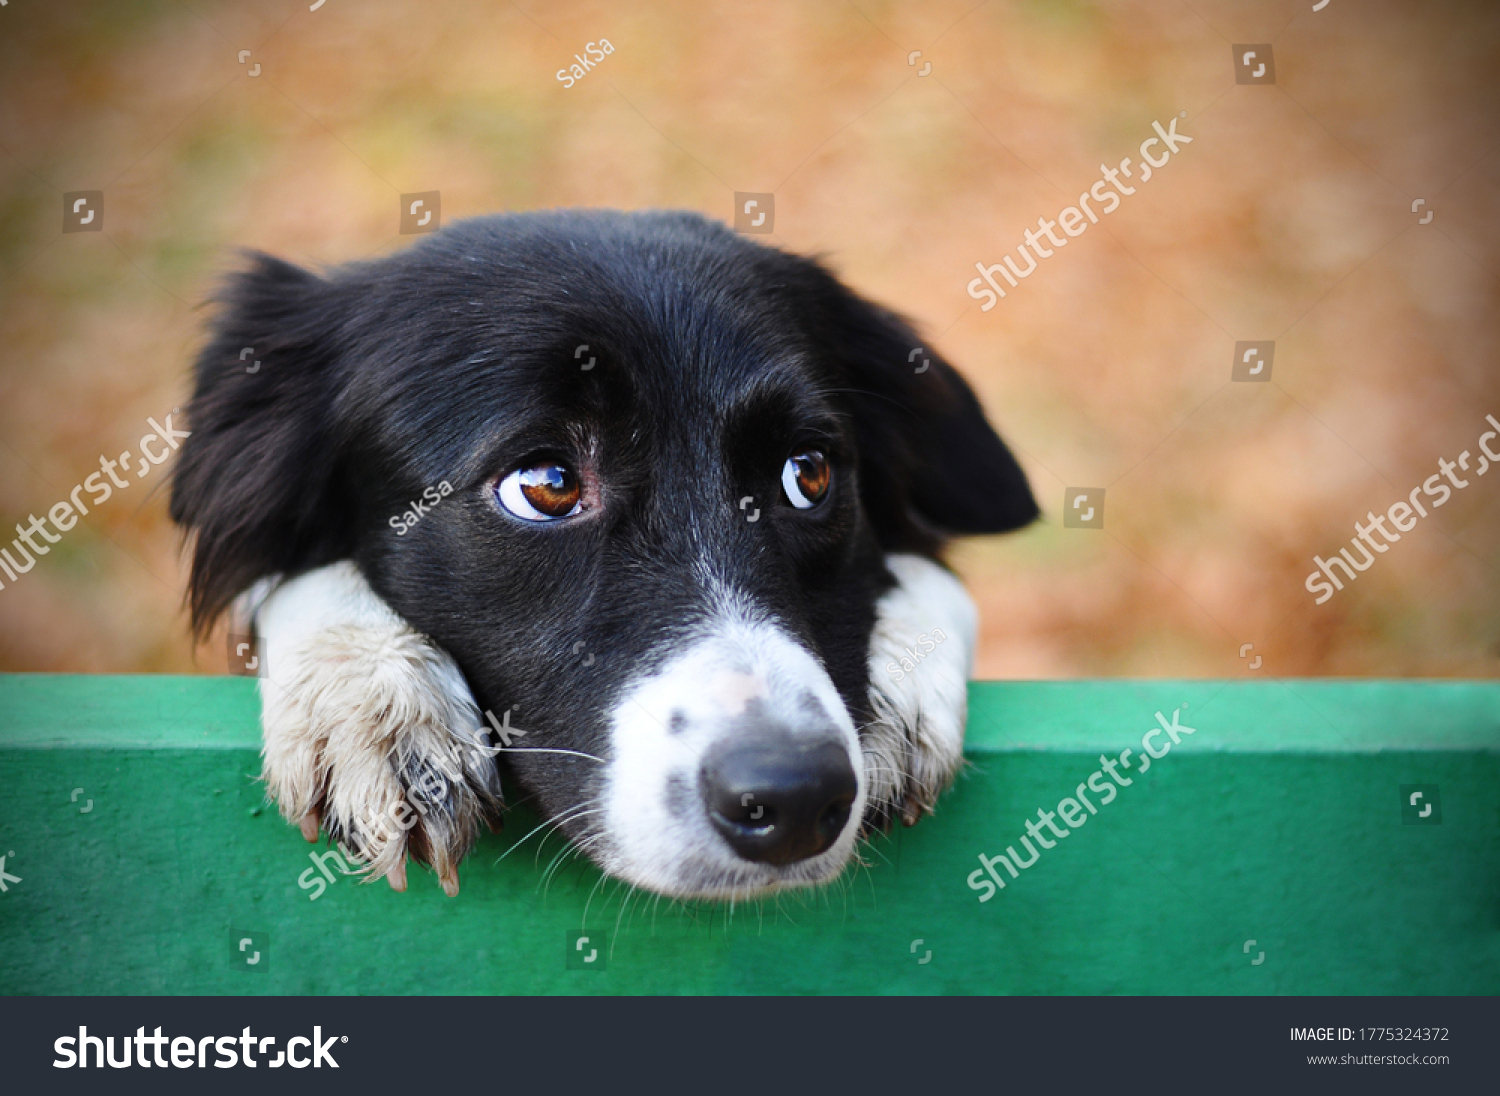 Skeptic sad border collie dog thinking & dont know what to do in park looks depressed. Homeless witty dog sad eyes thinking - look side. Collie dog sad eyes closeup hanging on bench. Collie thinking #1775324372